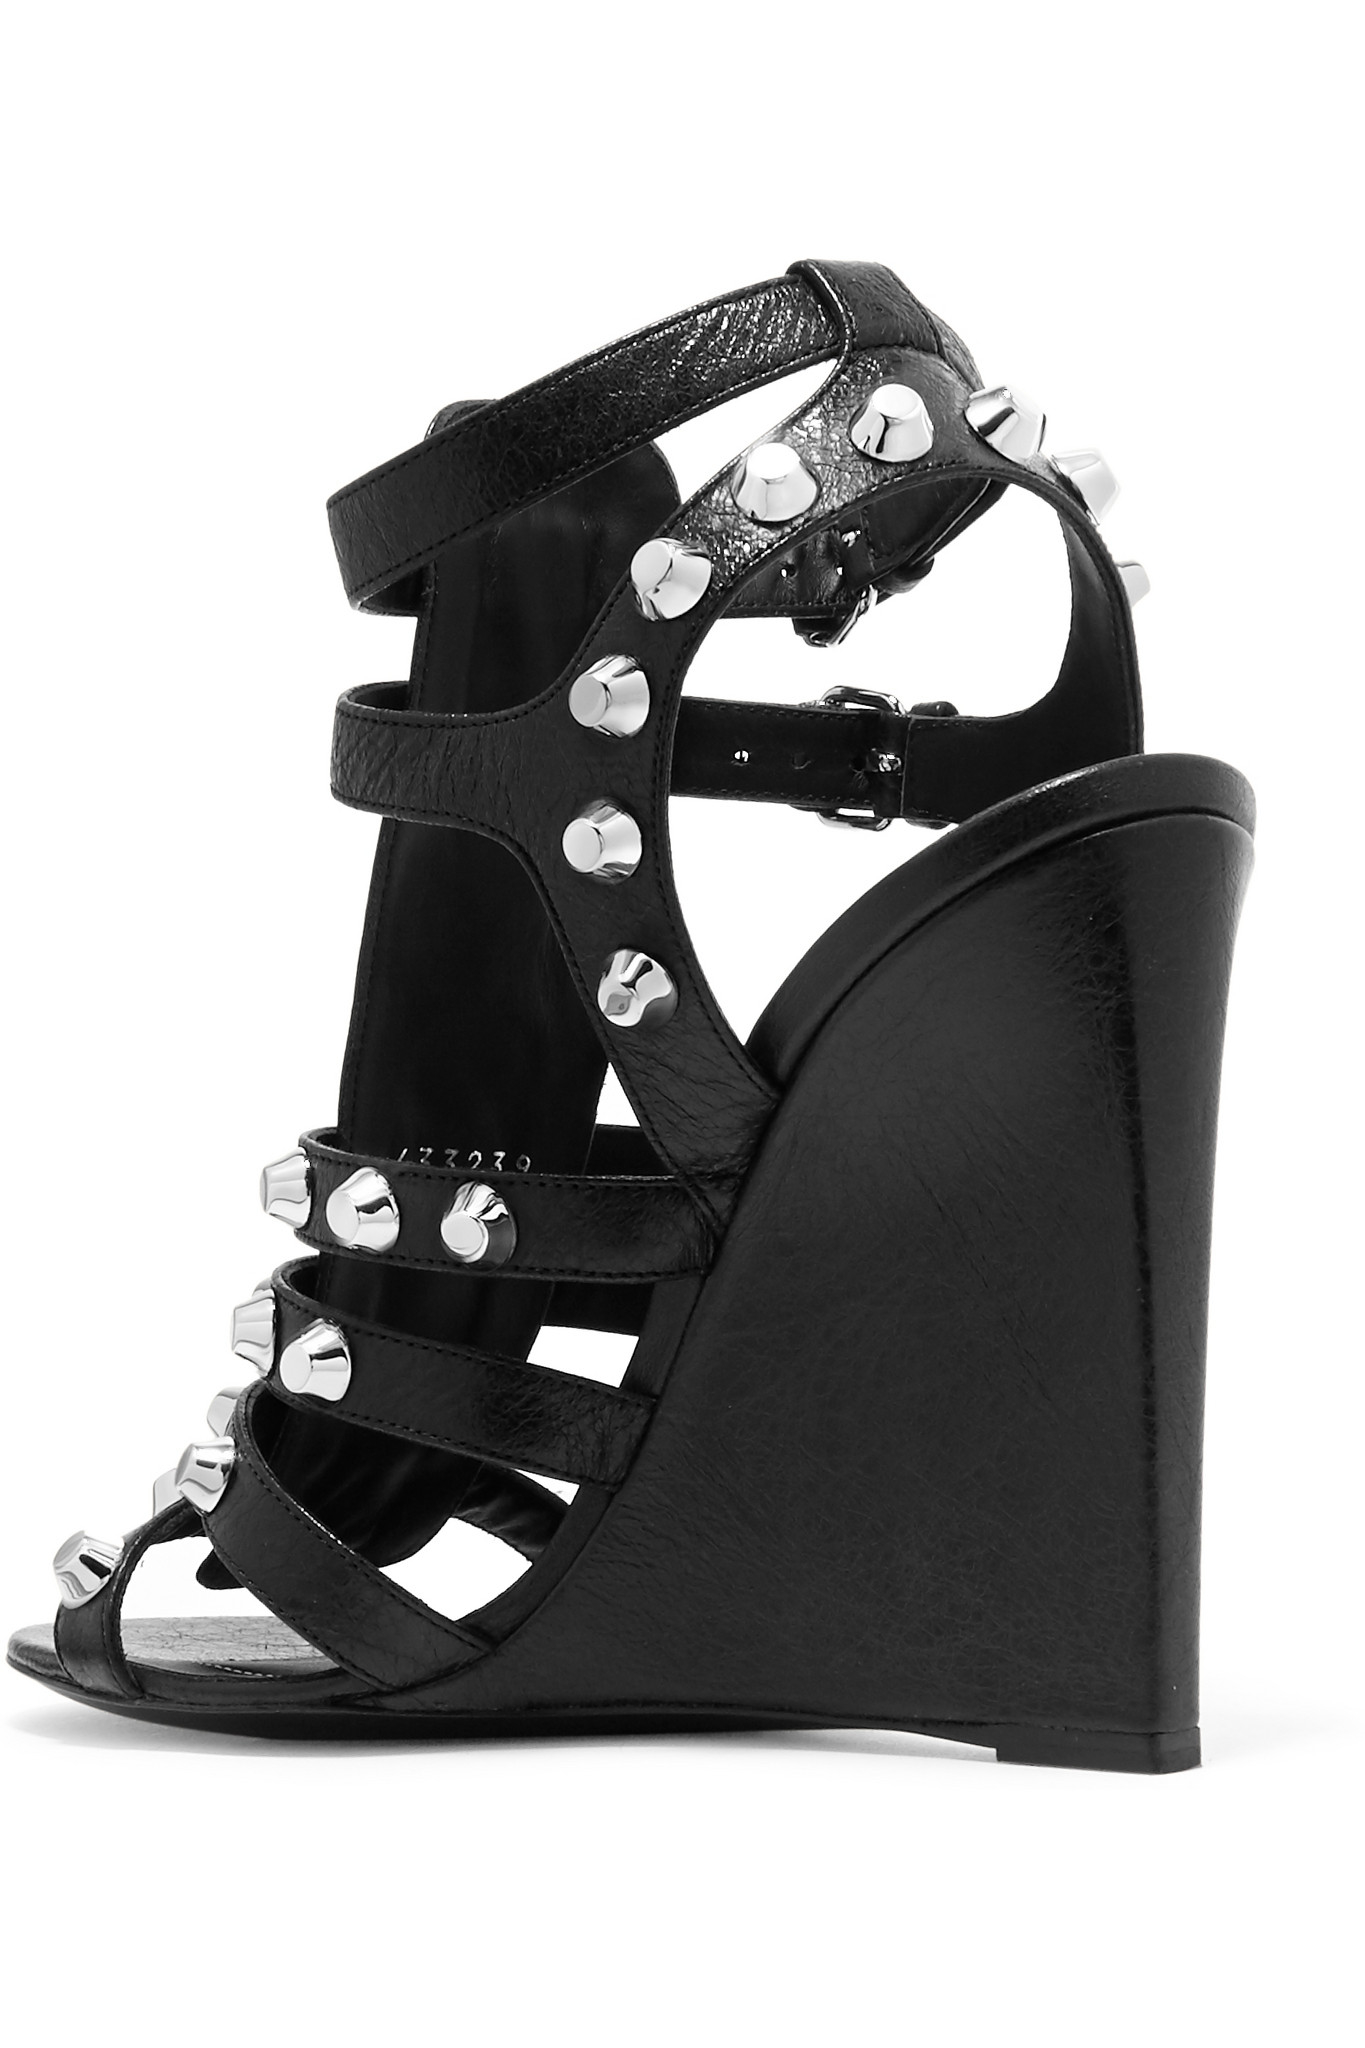 Balenciaga Studded Textured-leather Wedge Sandals in Black - Lyst